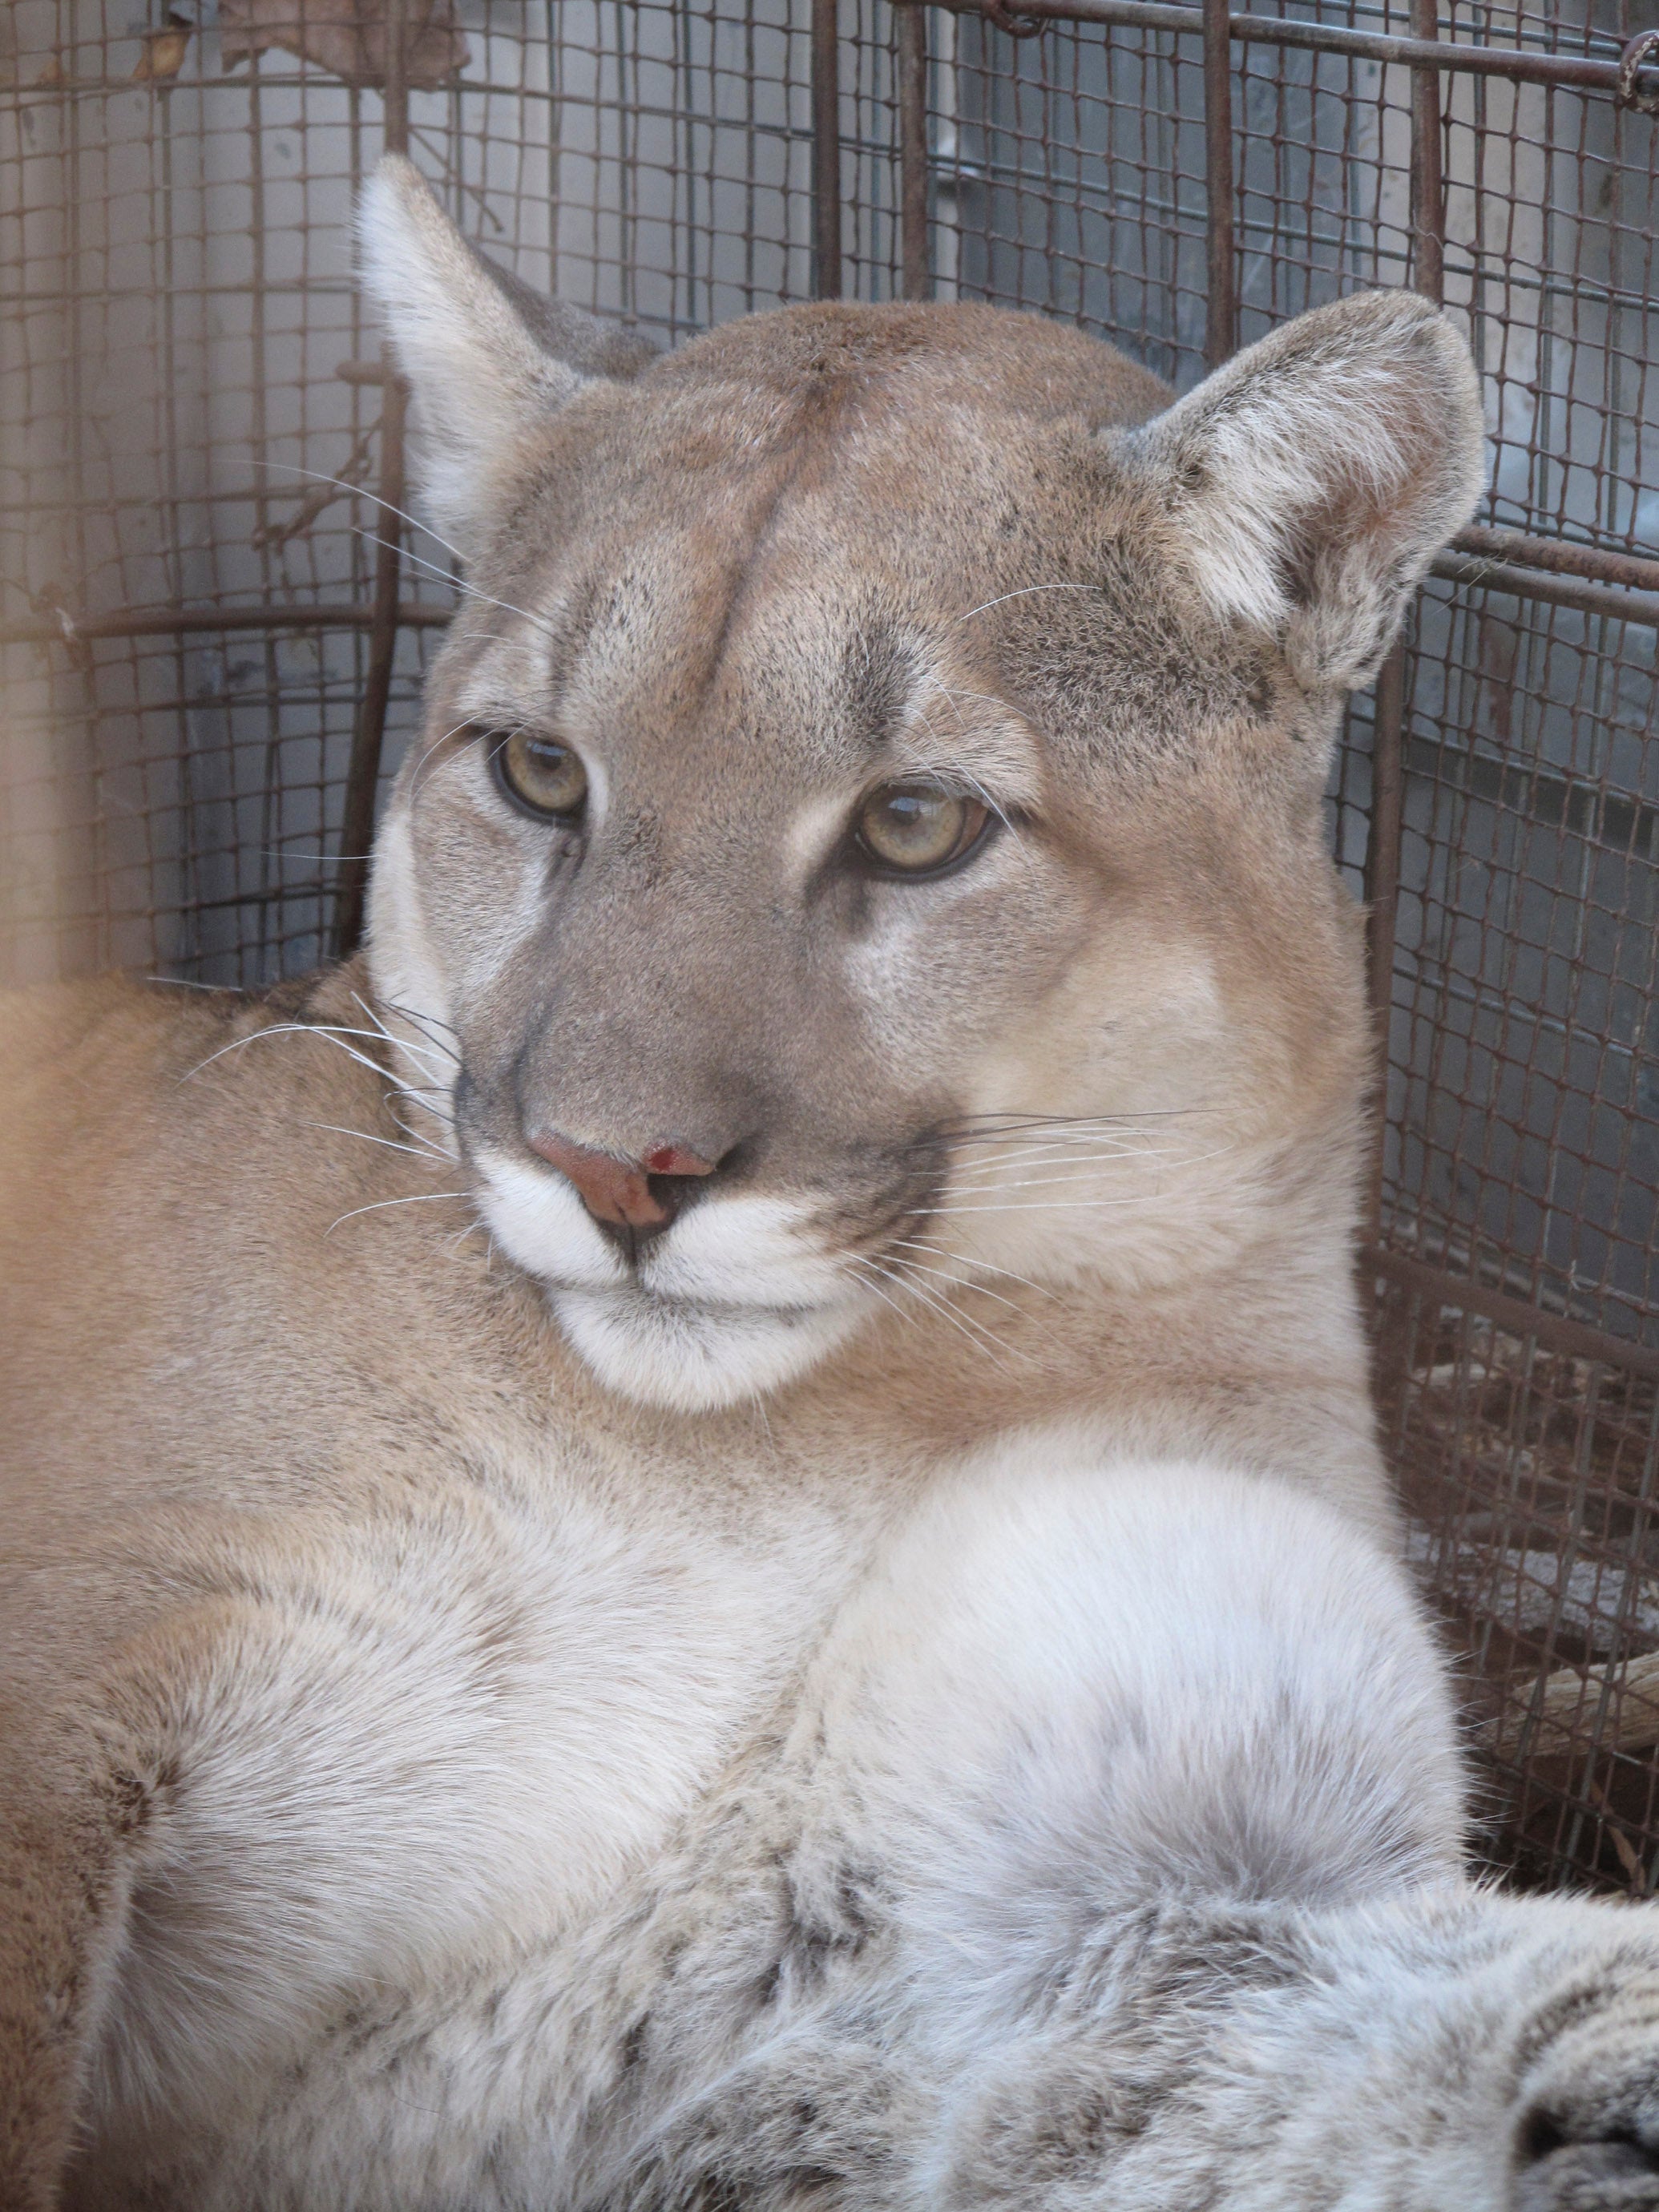 Mountain Lion Sedated in Trap